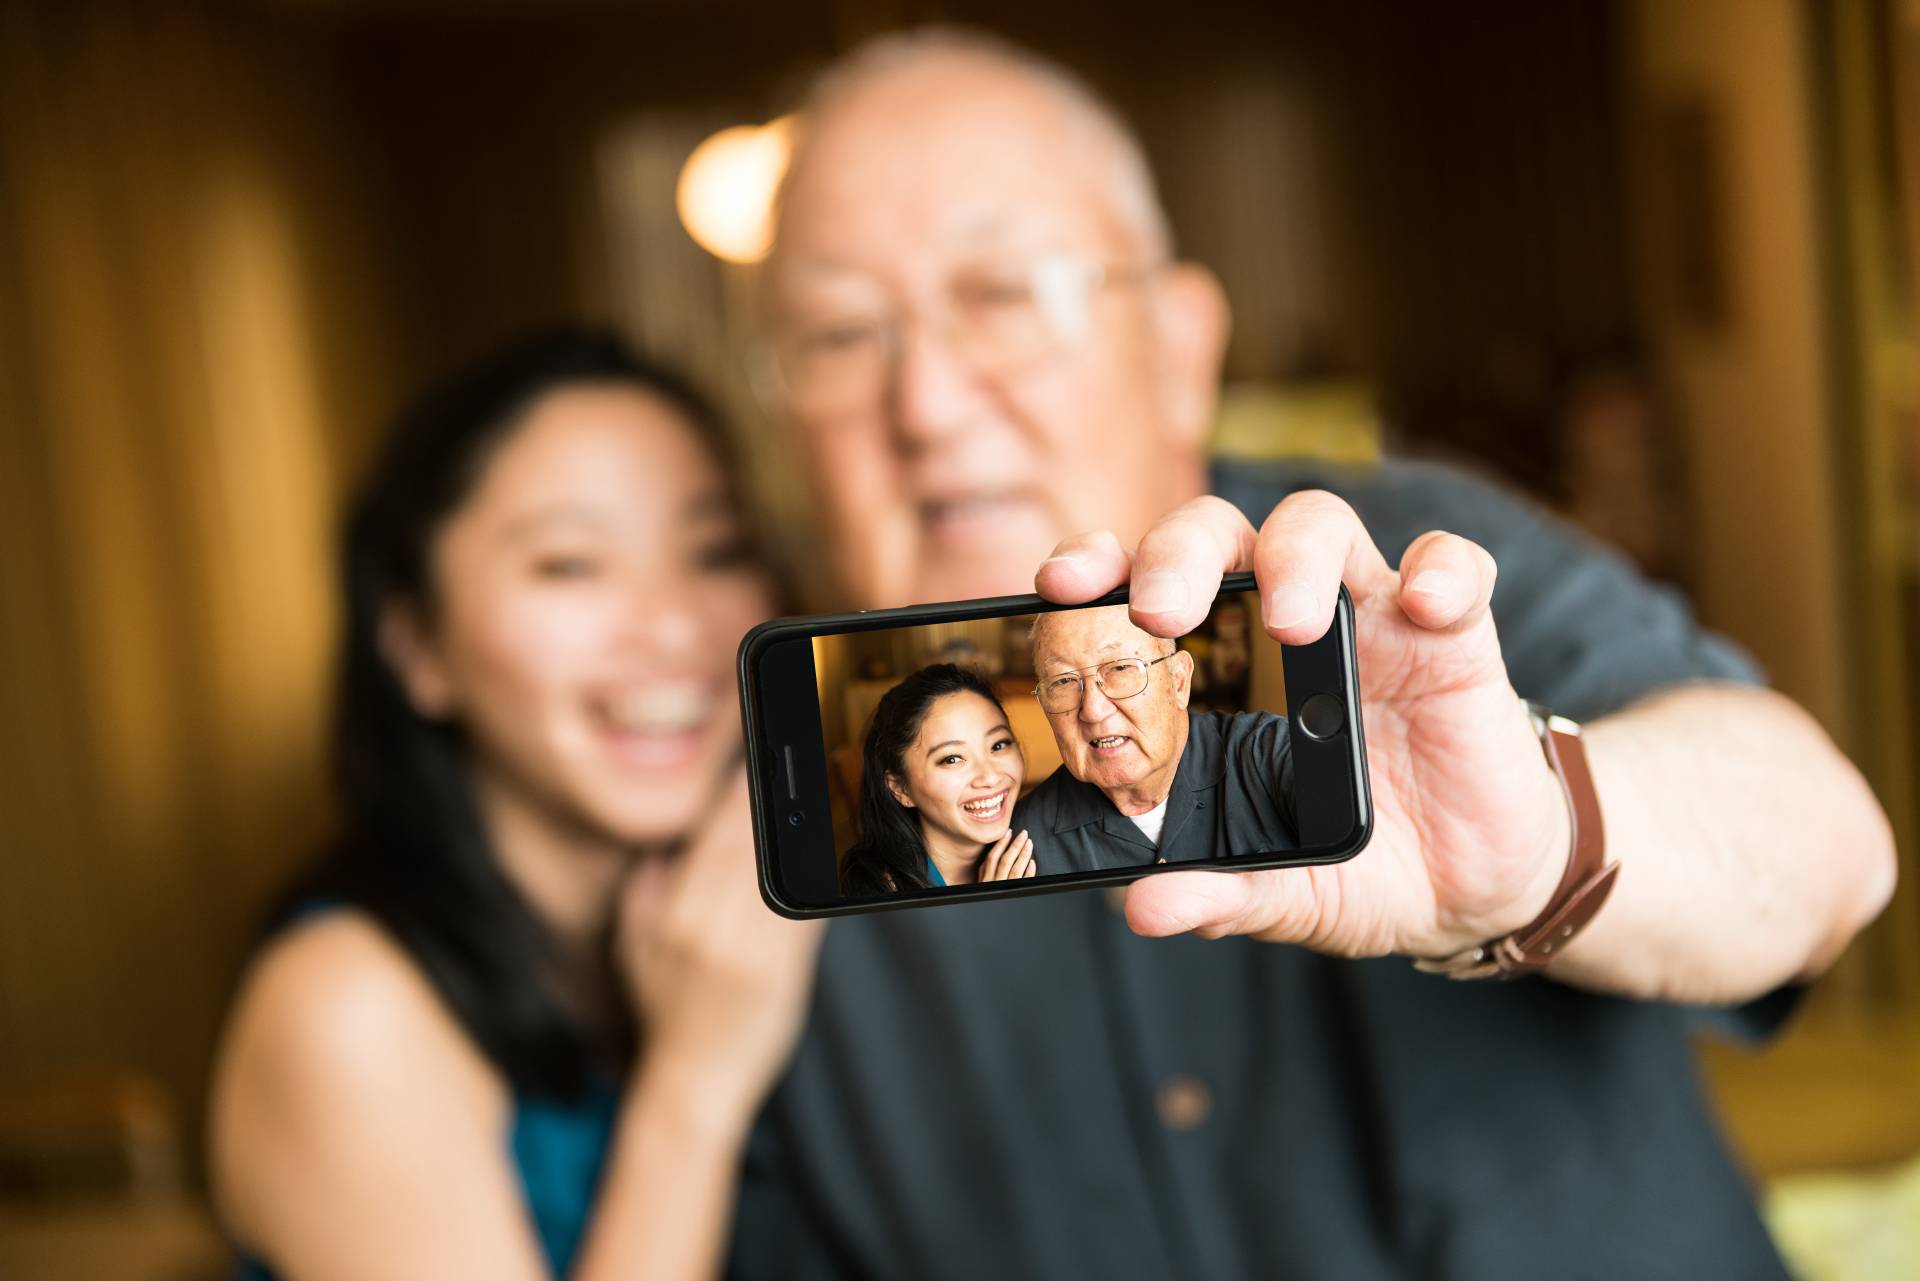 Taking a selfie with a photo